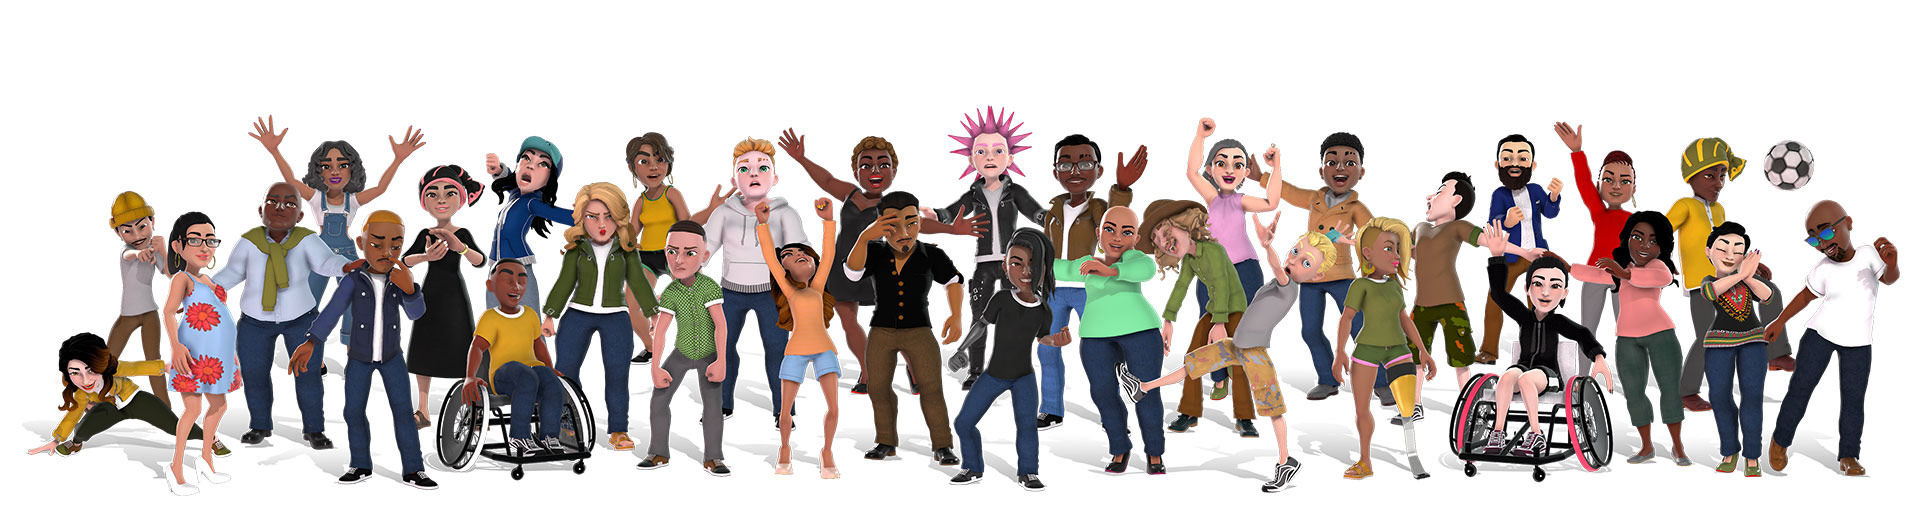 An image that shows the diversity of Xbox One's inclusive avatars that were released in 2018. There is a crowd of different 'people' all standing together.